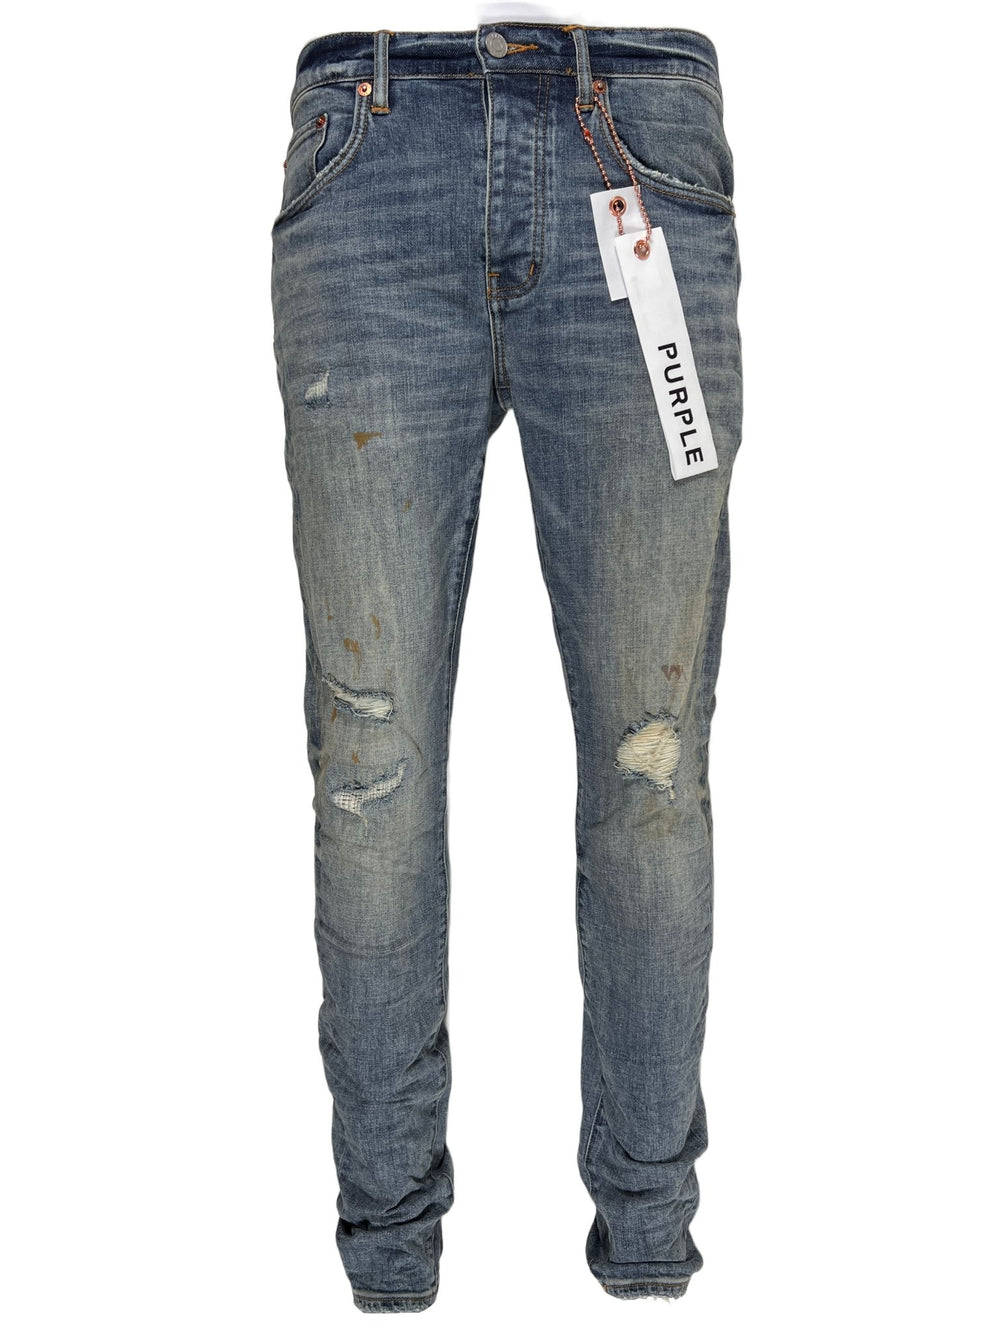 A pair of men's PURPLE BRAND JEANS P001-WLIB WORN LIGHT INDIGO BLOWOUT with a tag on them from PURPLE BRAND.